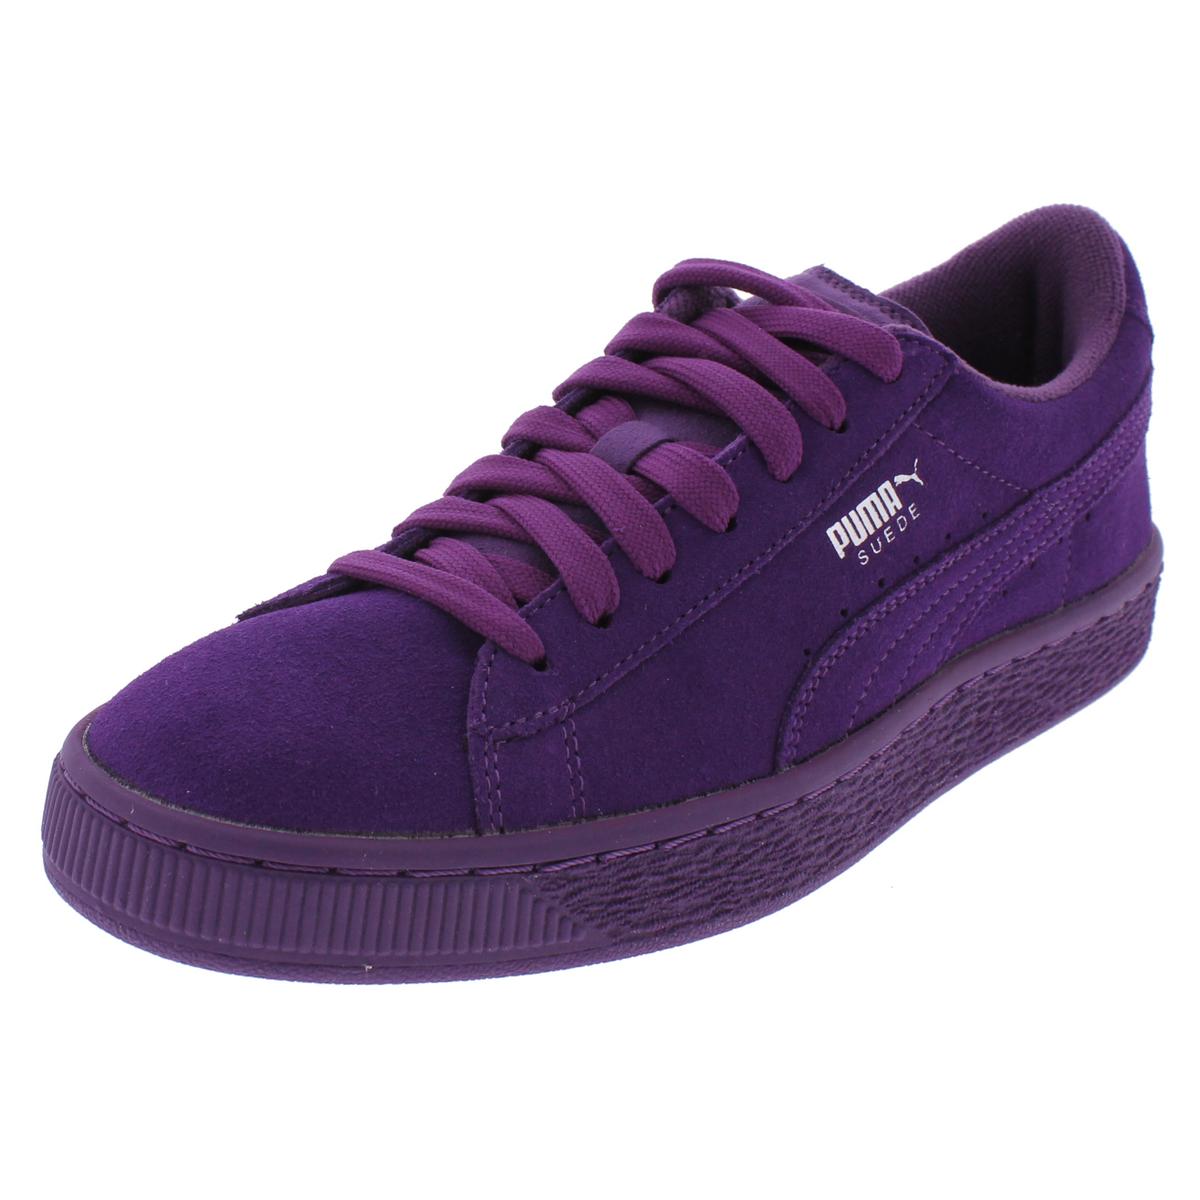 Puma Girls Suede Jr Suede Low Top Casual Shoes - image 1 of 4